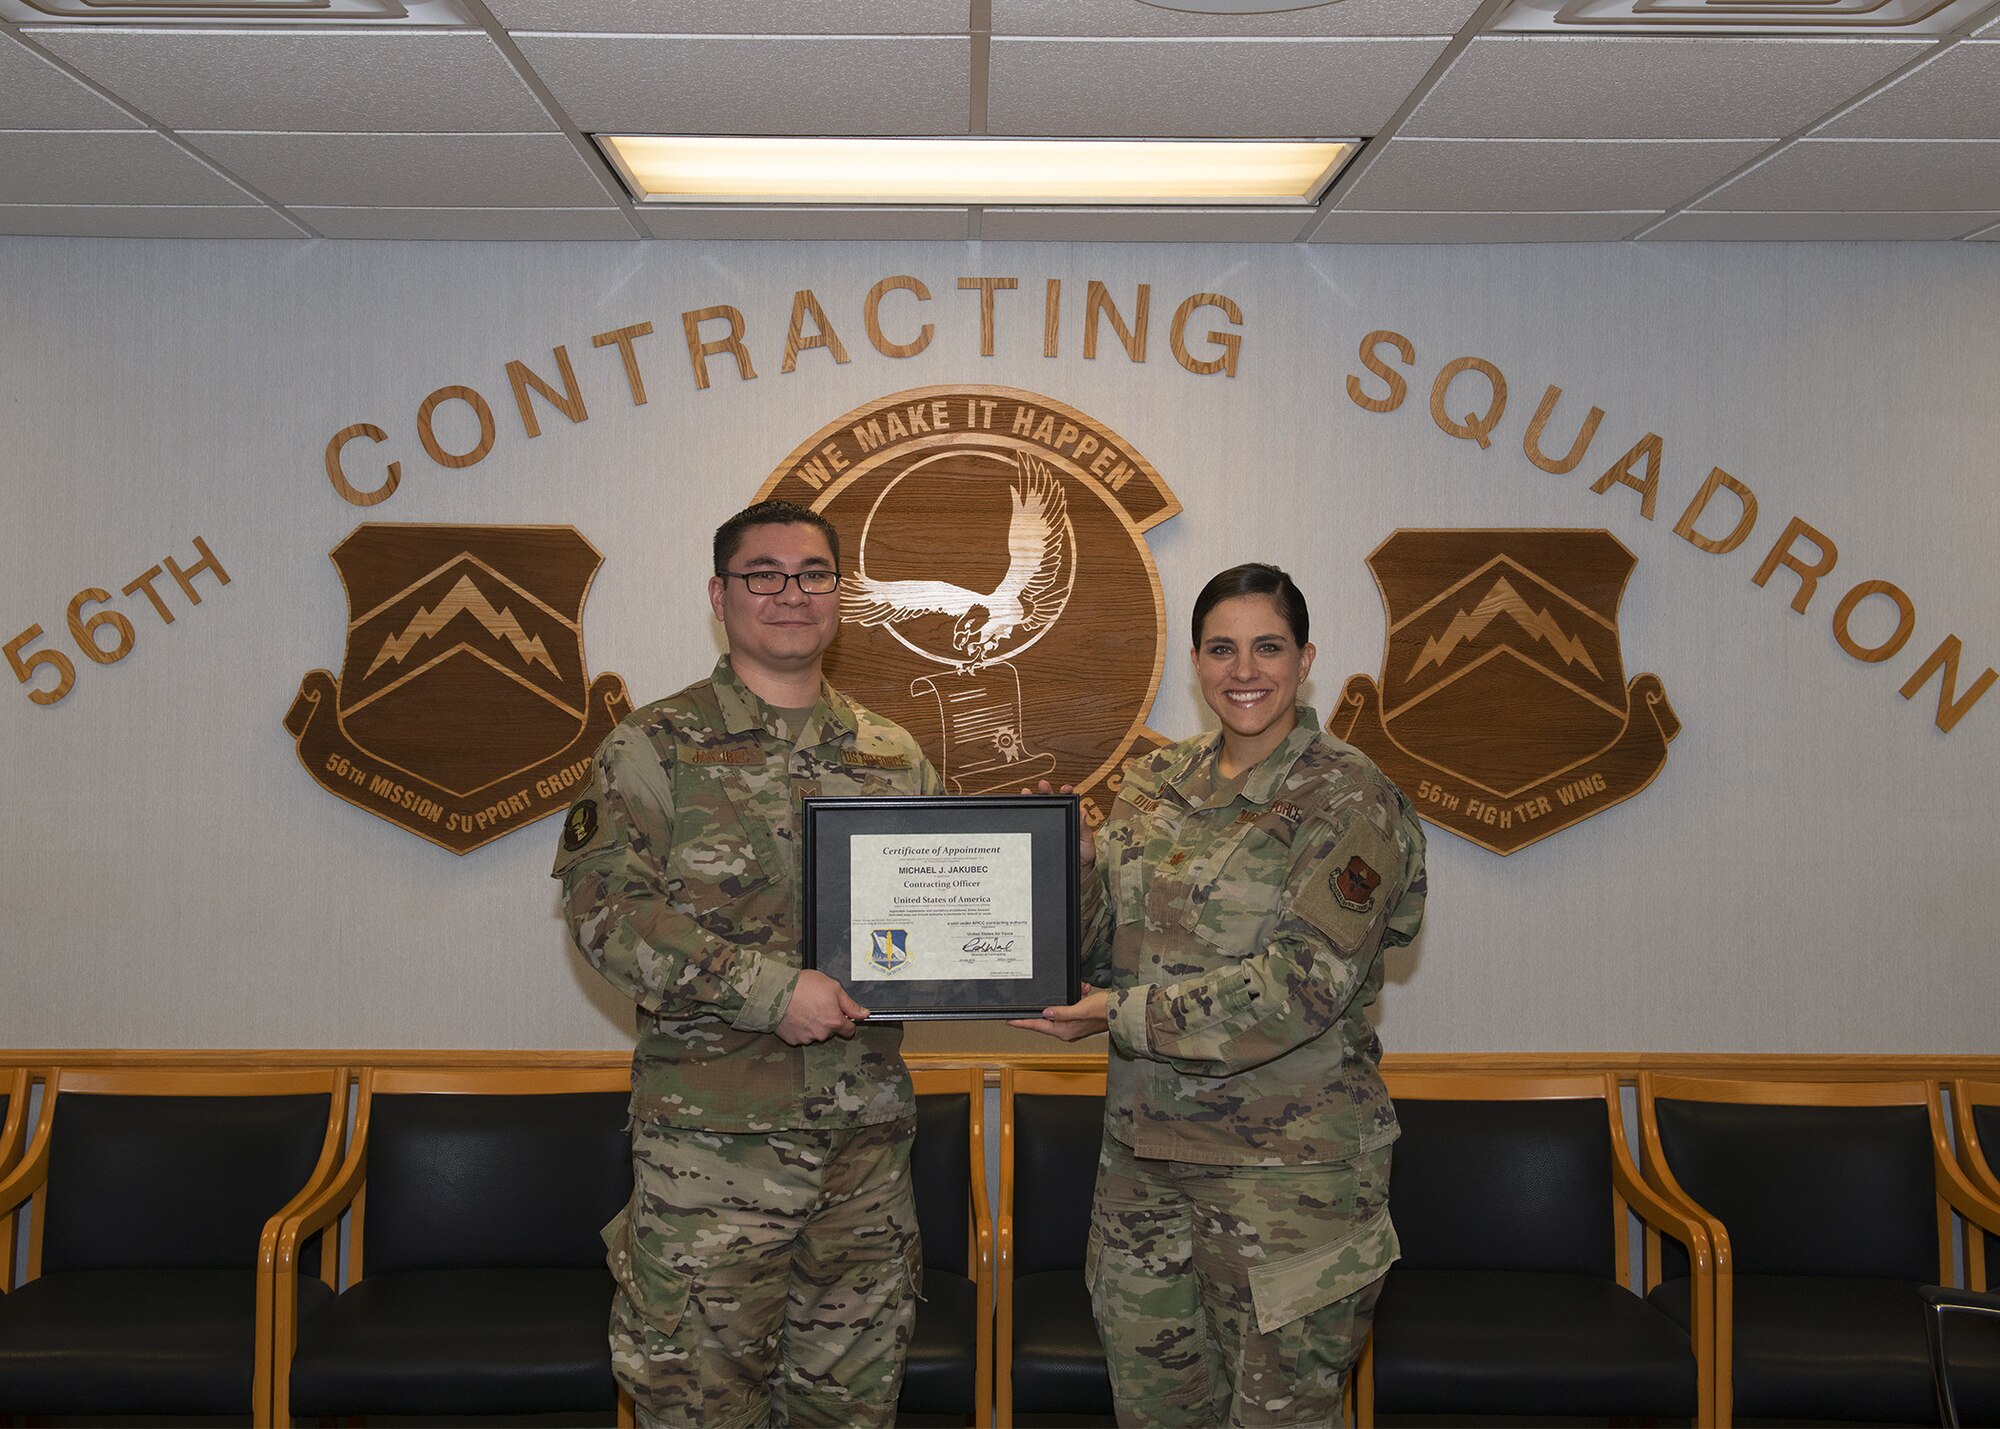 Tech. Sgt. Michael Jakubec, 56th CONS noncommissioned officer in charge of services flight, receives an unlimited contract warrant certificate from Maj. Barbara Divine, 56th Contracting Squadron commander, Sept. 26, 2019, at Luke Air Force Base, Ariz.